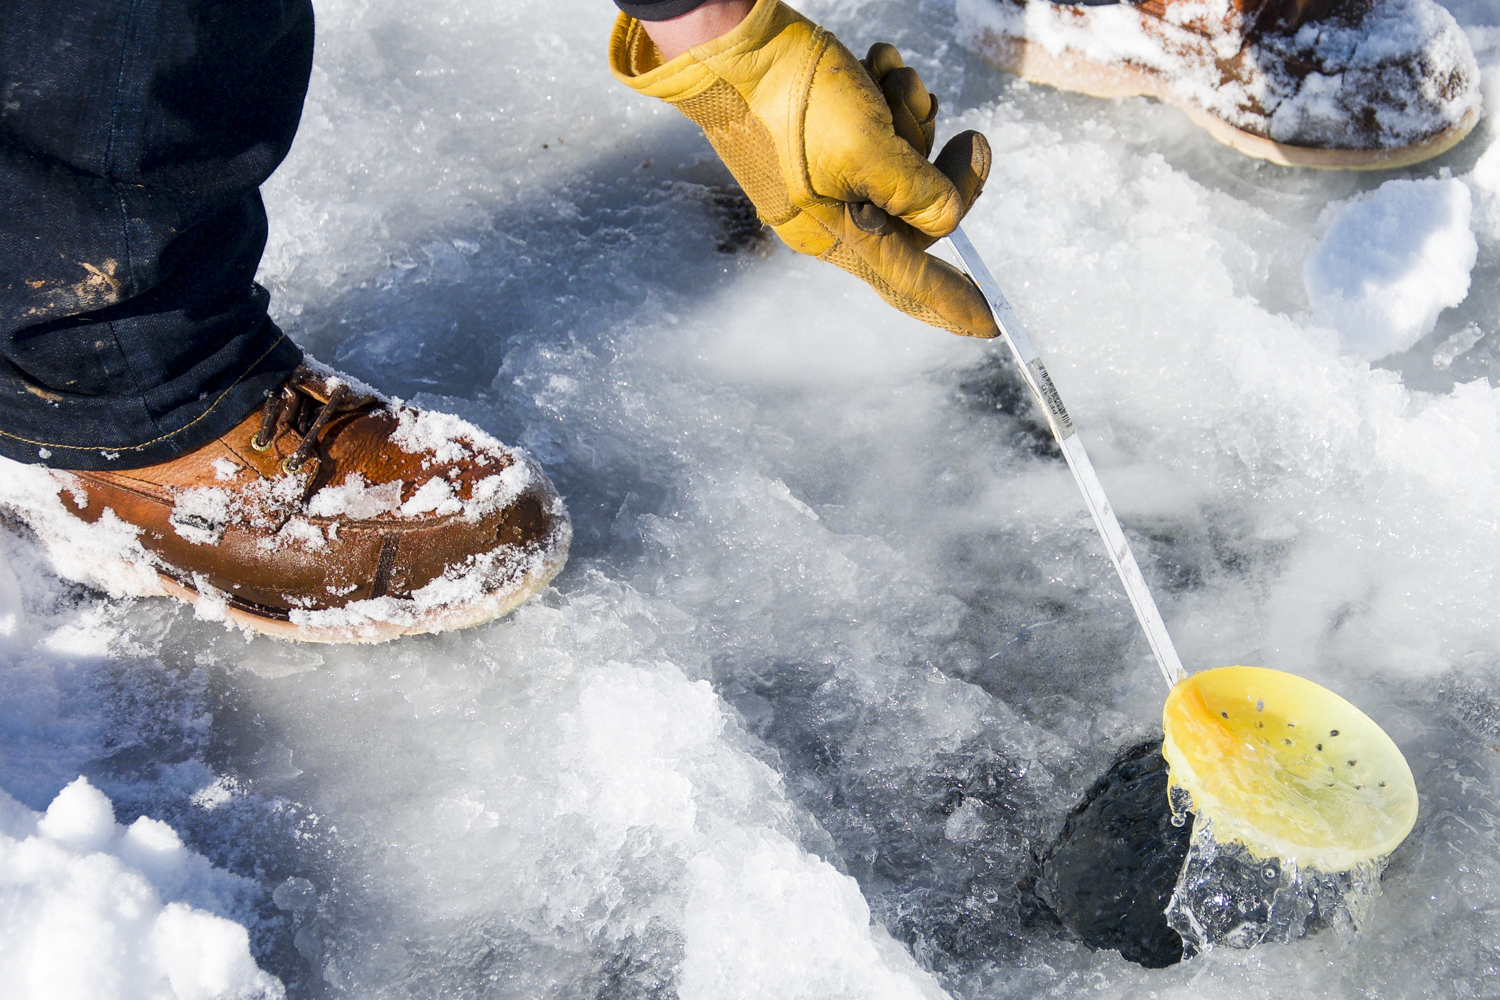 Ice fishing means winter fun, and here's how (and where) to get